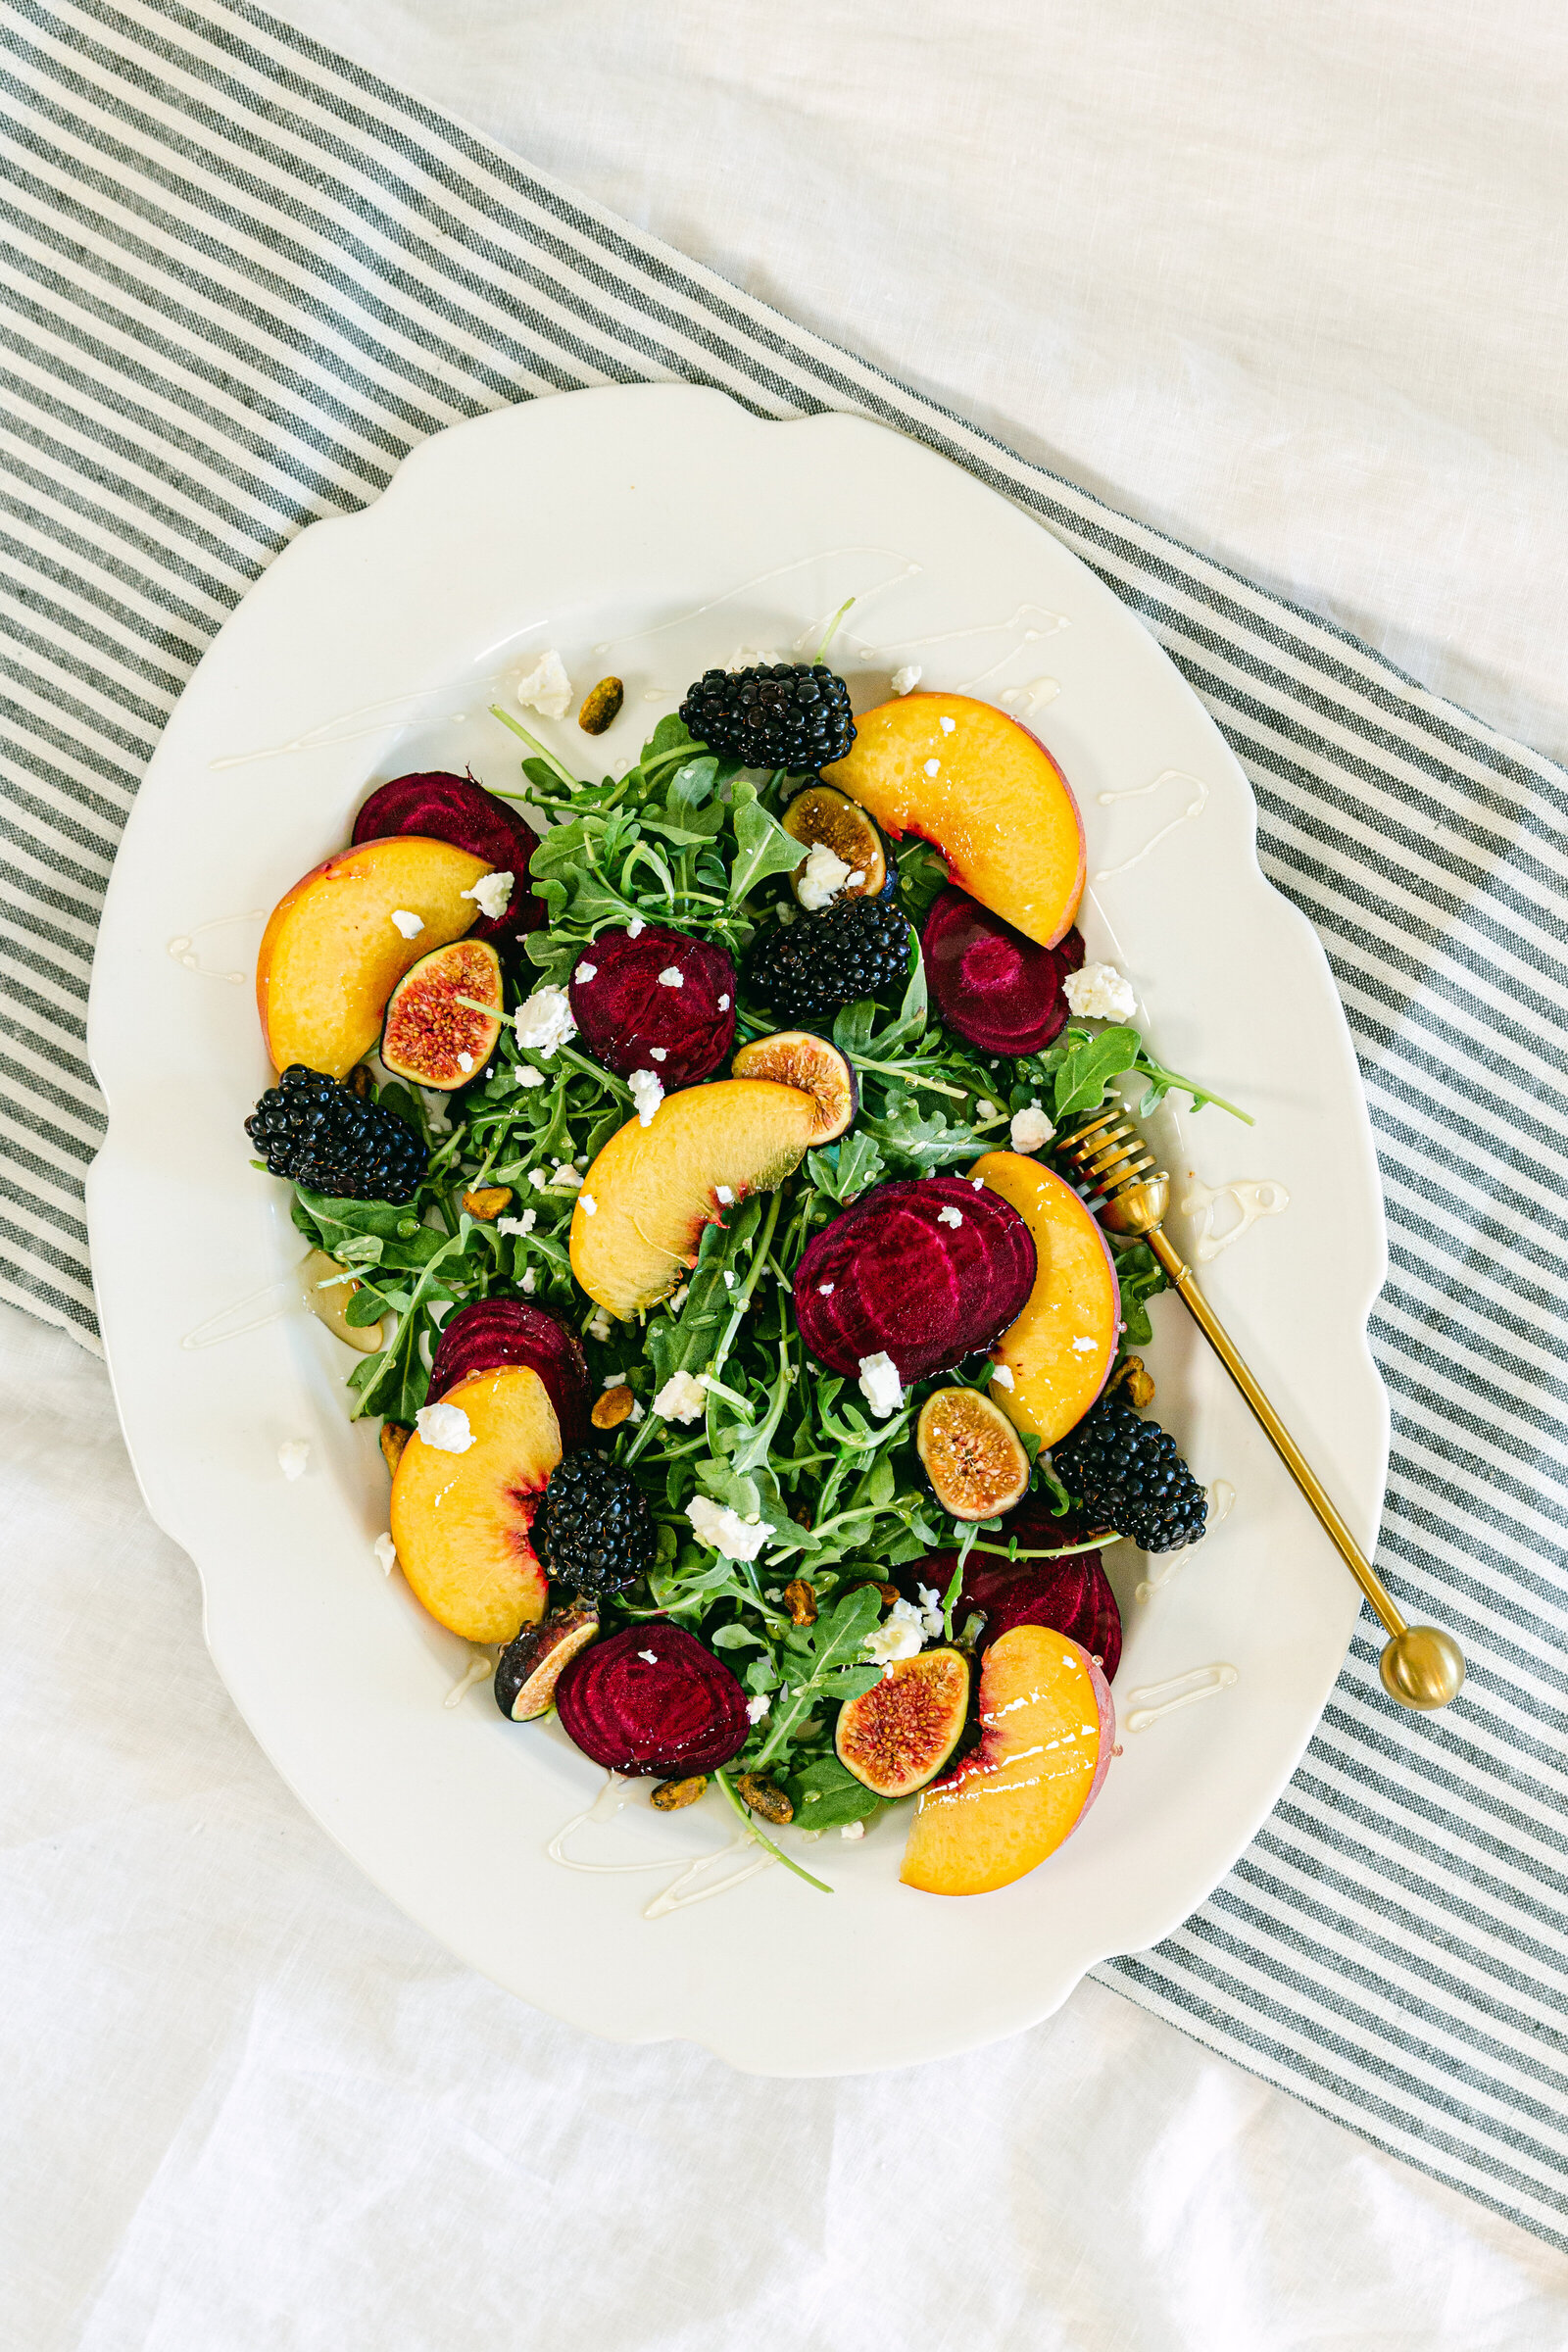 Colorful fall salad by food photographer Chelsea Loren with goat cheese, beets, nectarines, blackberries on white and striped backdrop for lifestyle food photography